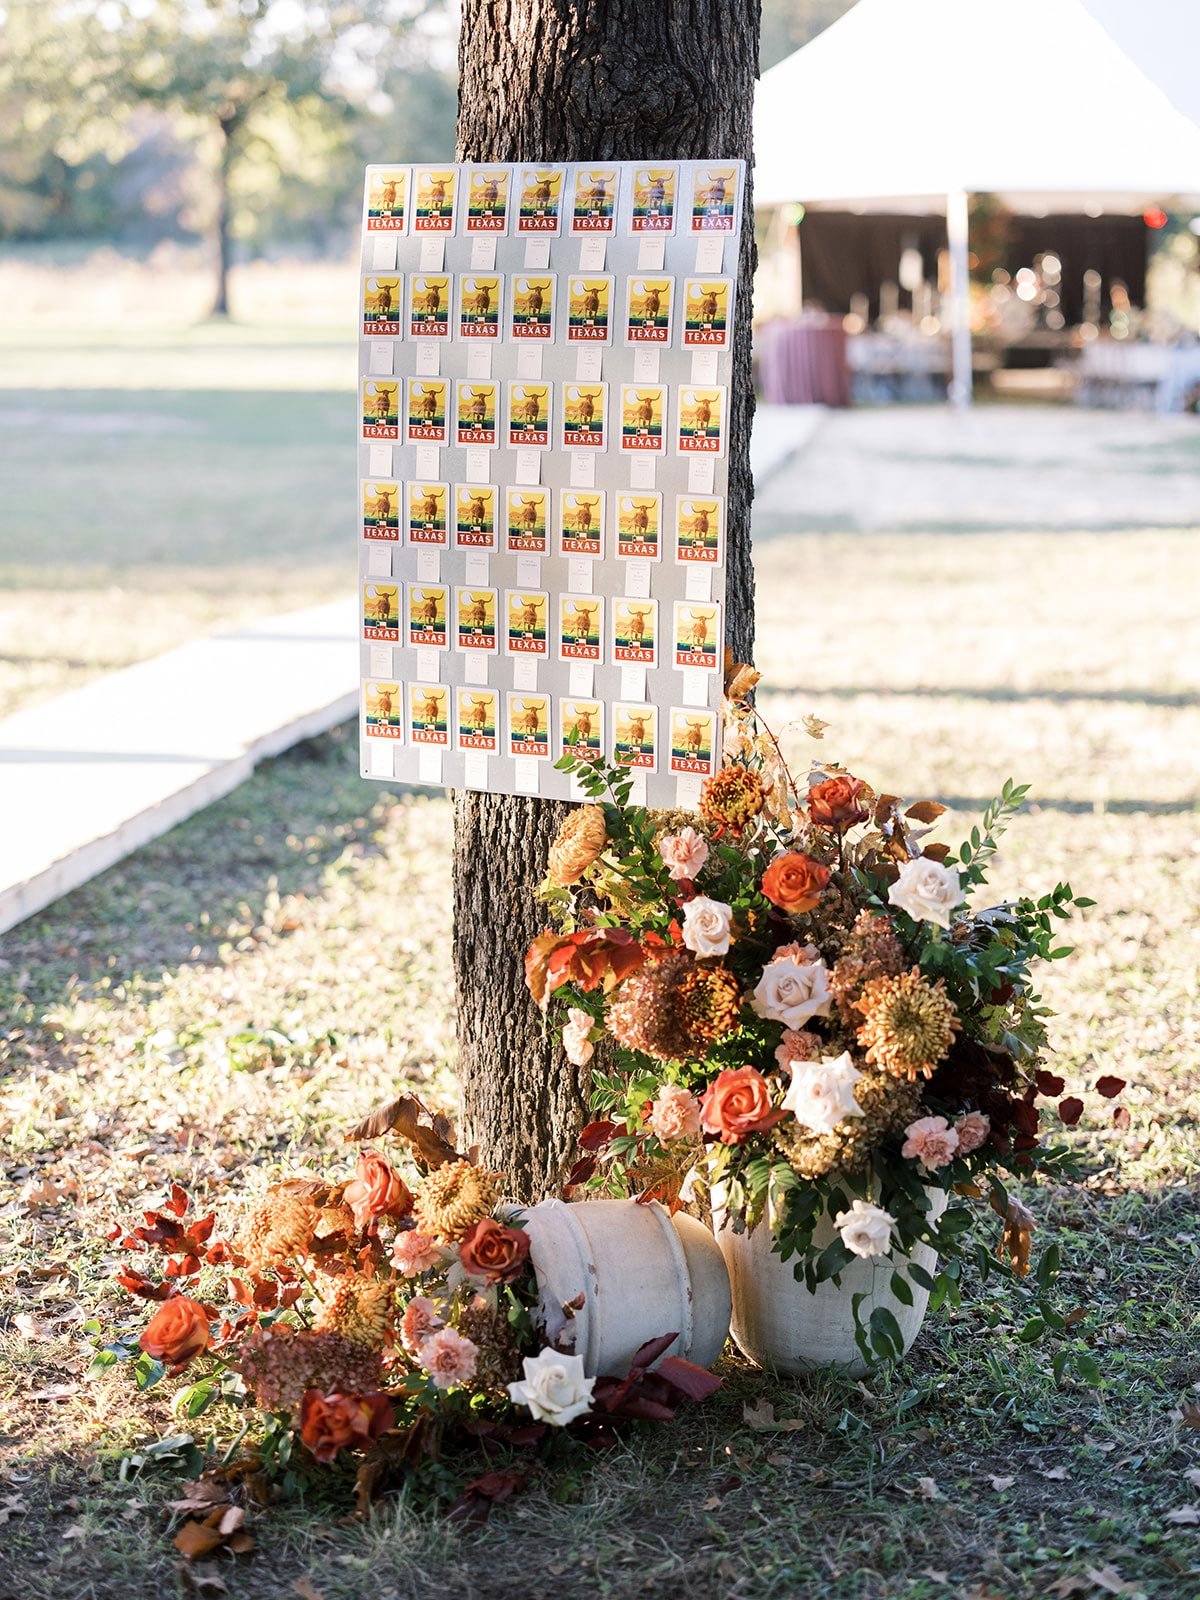 Magnet Board seating chart designed by Texas and Destination Wedding planner Shannon Rose Events